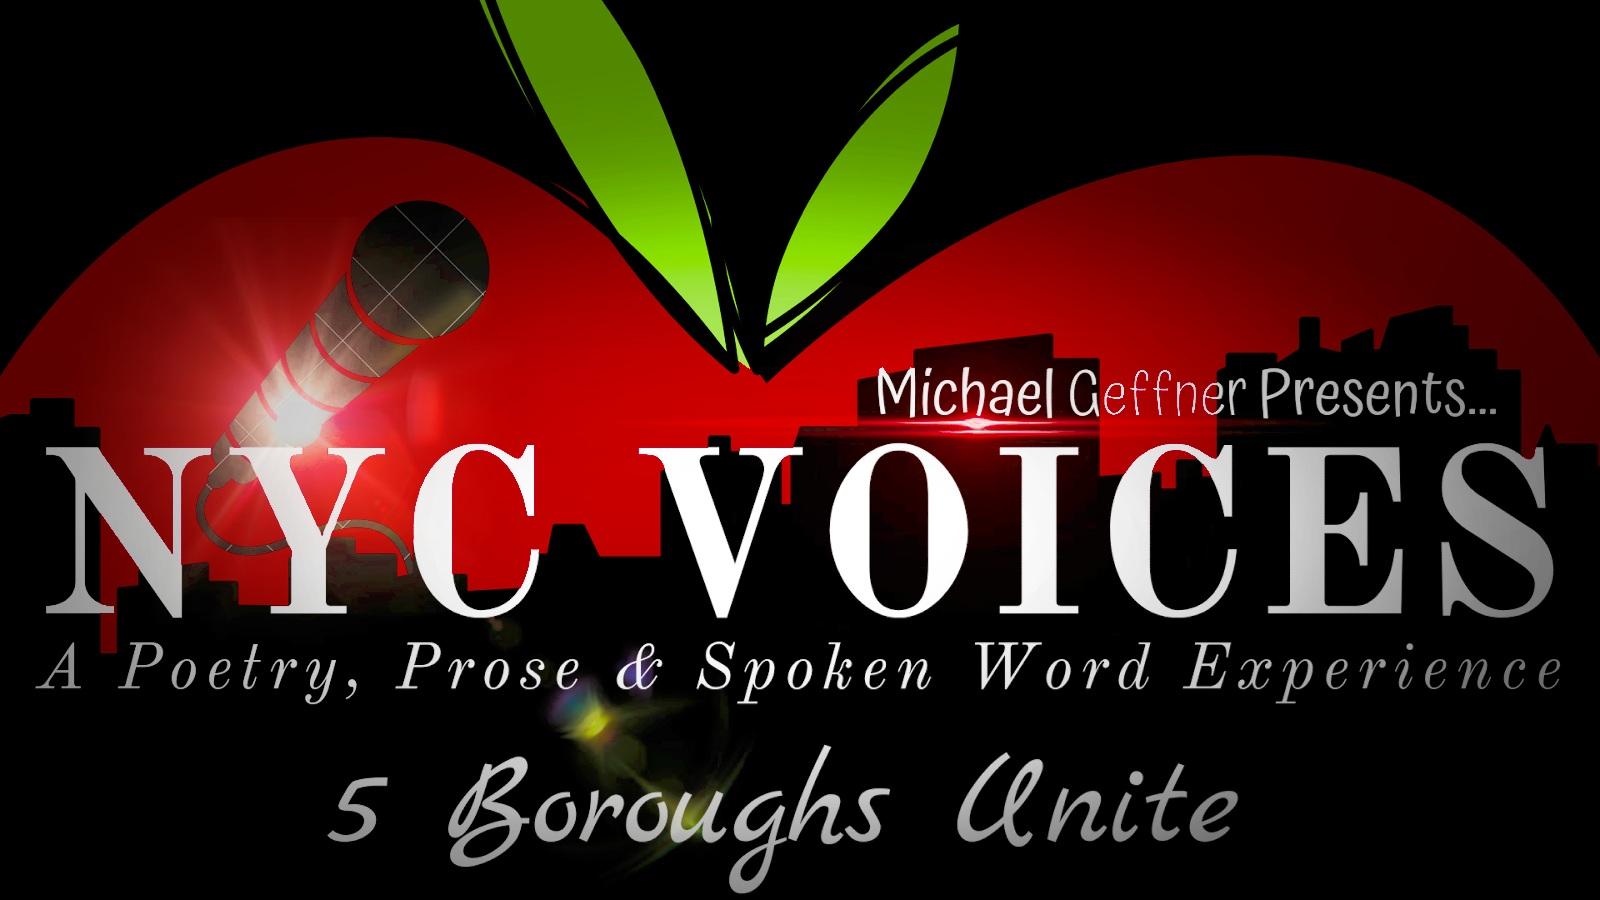 NYC Voices: A Poetry, Prose & Spoken Word Experience - 5 Boroughs Unite